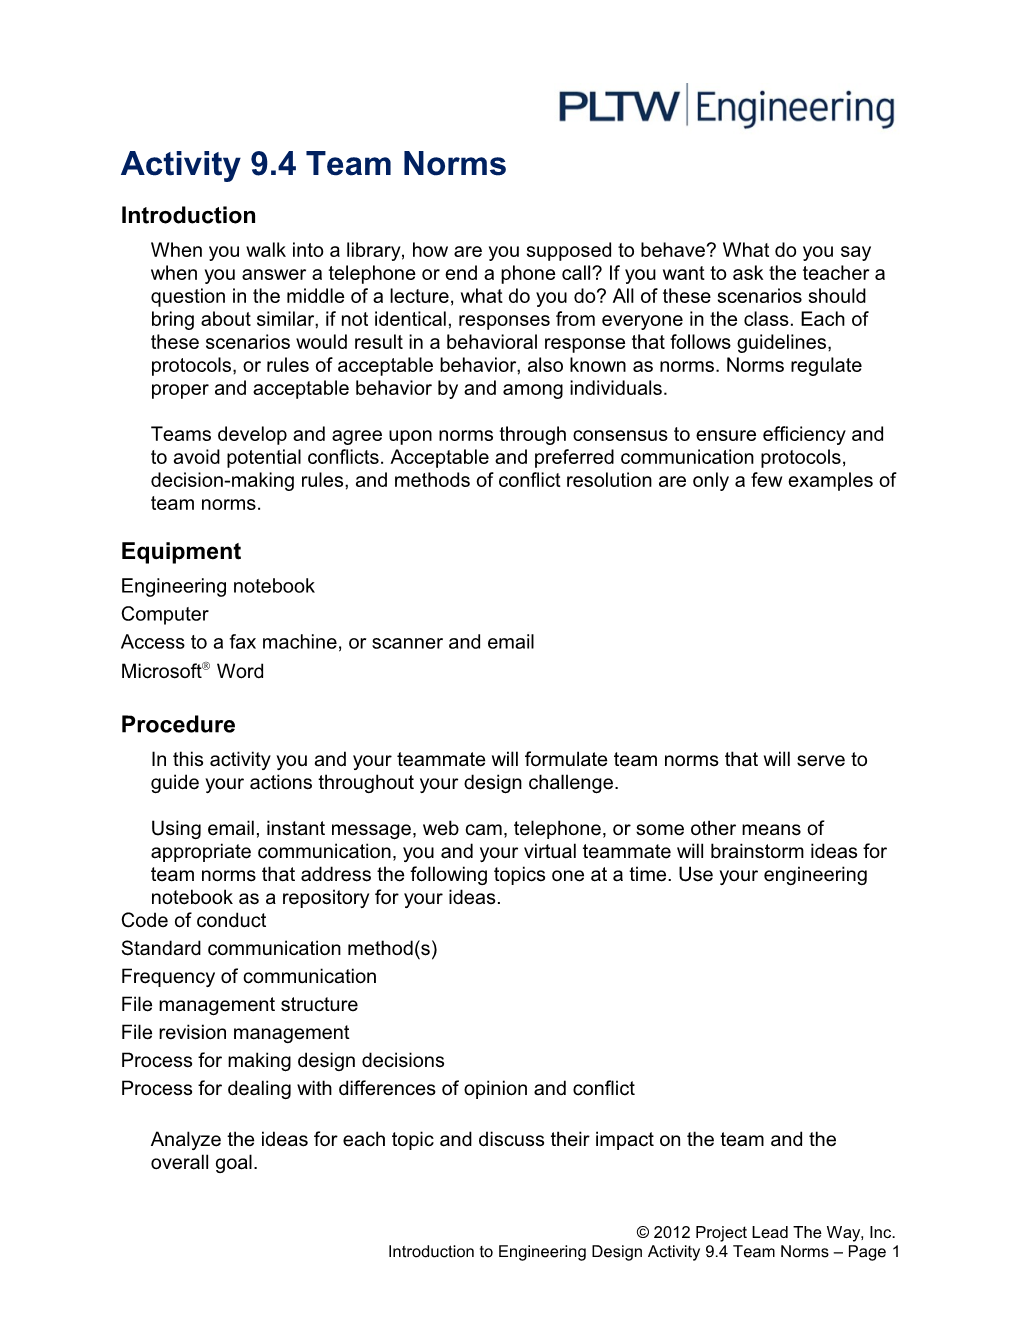 Activity 9.4 Team Norms